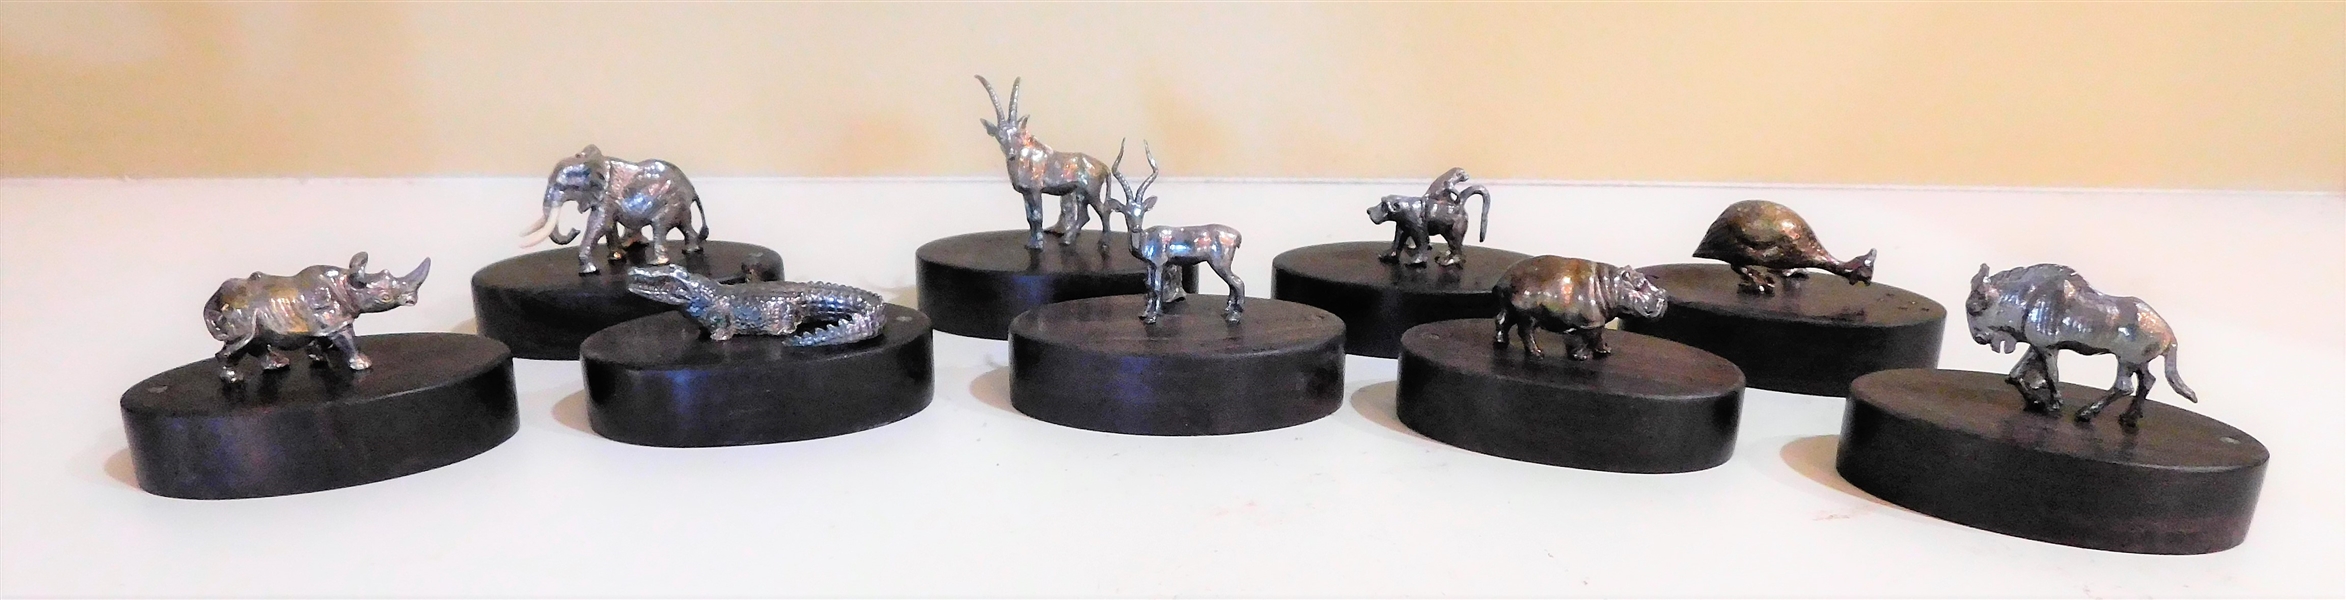 9 Wood and Sterling Silver Animal Place Card Holders - Signed PM (Patrick Mavros) - Hippo, Alligator, Monkey, Elephant, Rhino, and Others - 2 1/2" Long